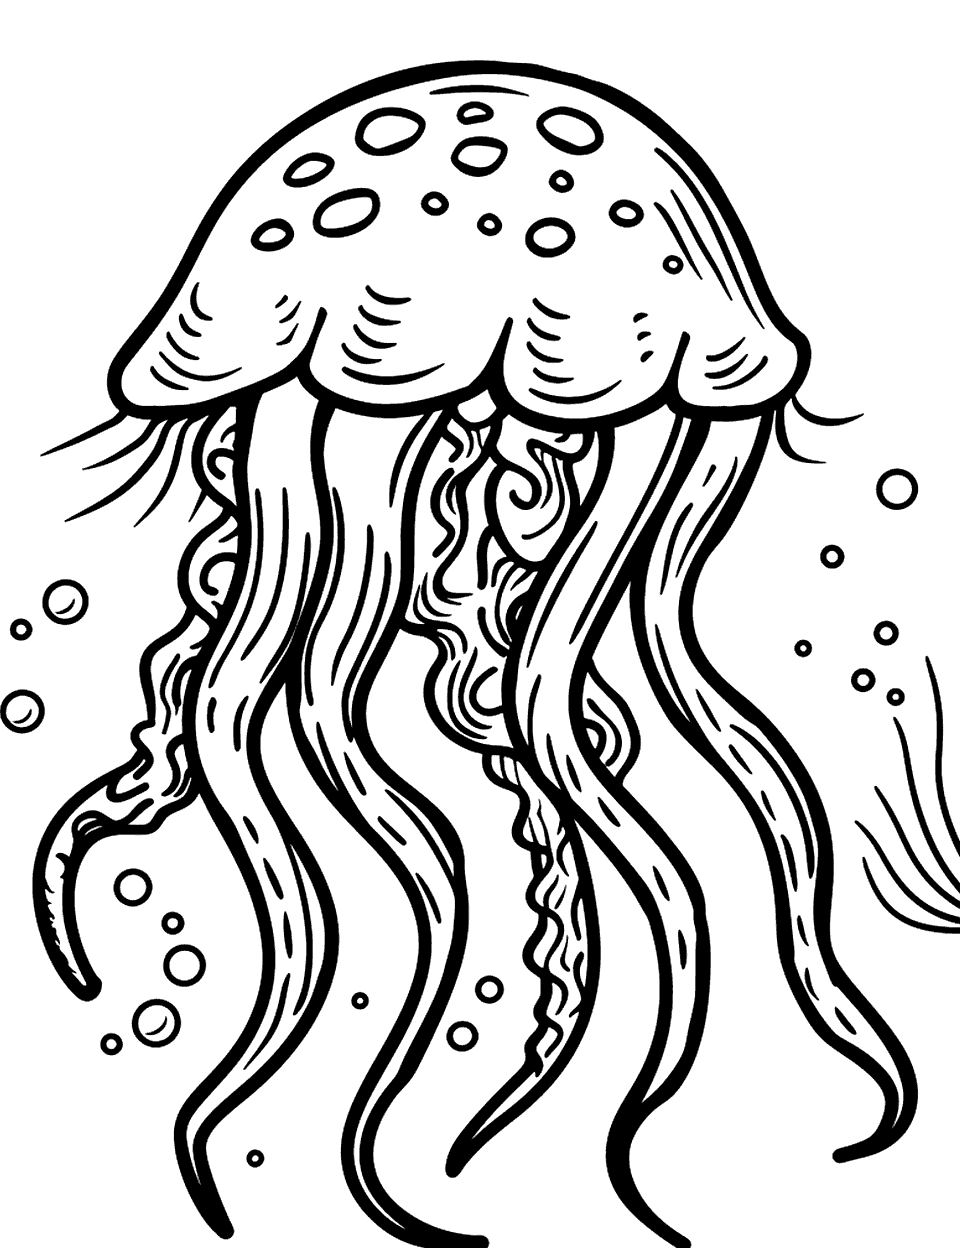 Jellyfish Floating Serenely Sea Creature Coloring Page - A jellyfish drifts calmly with its tentacles trailing behind.